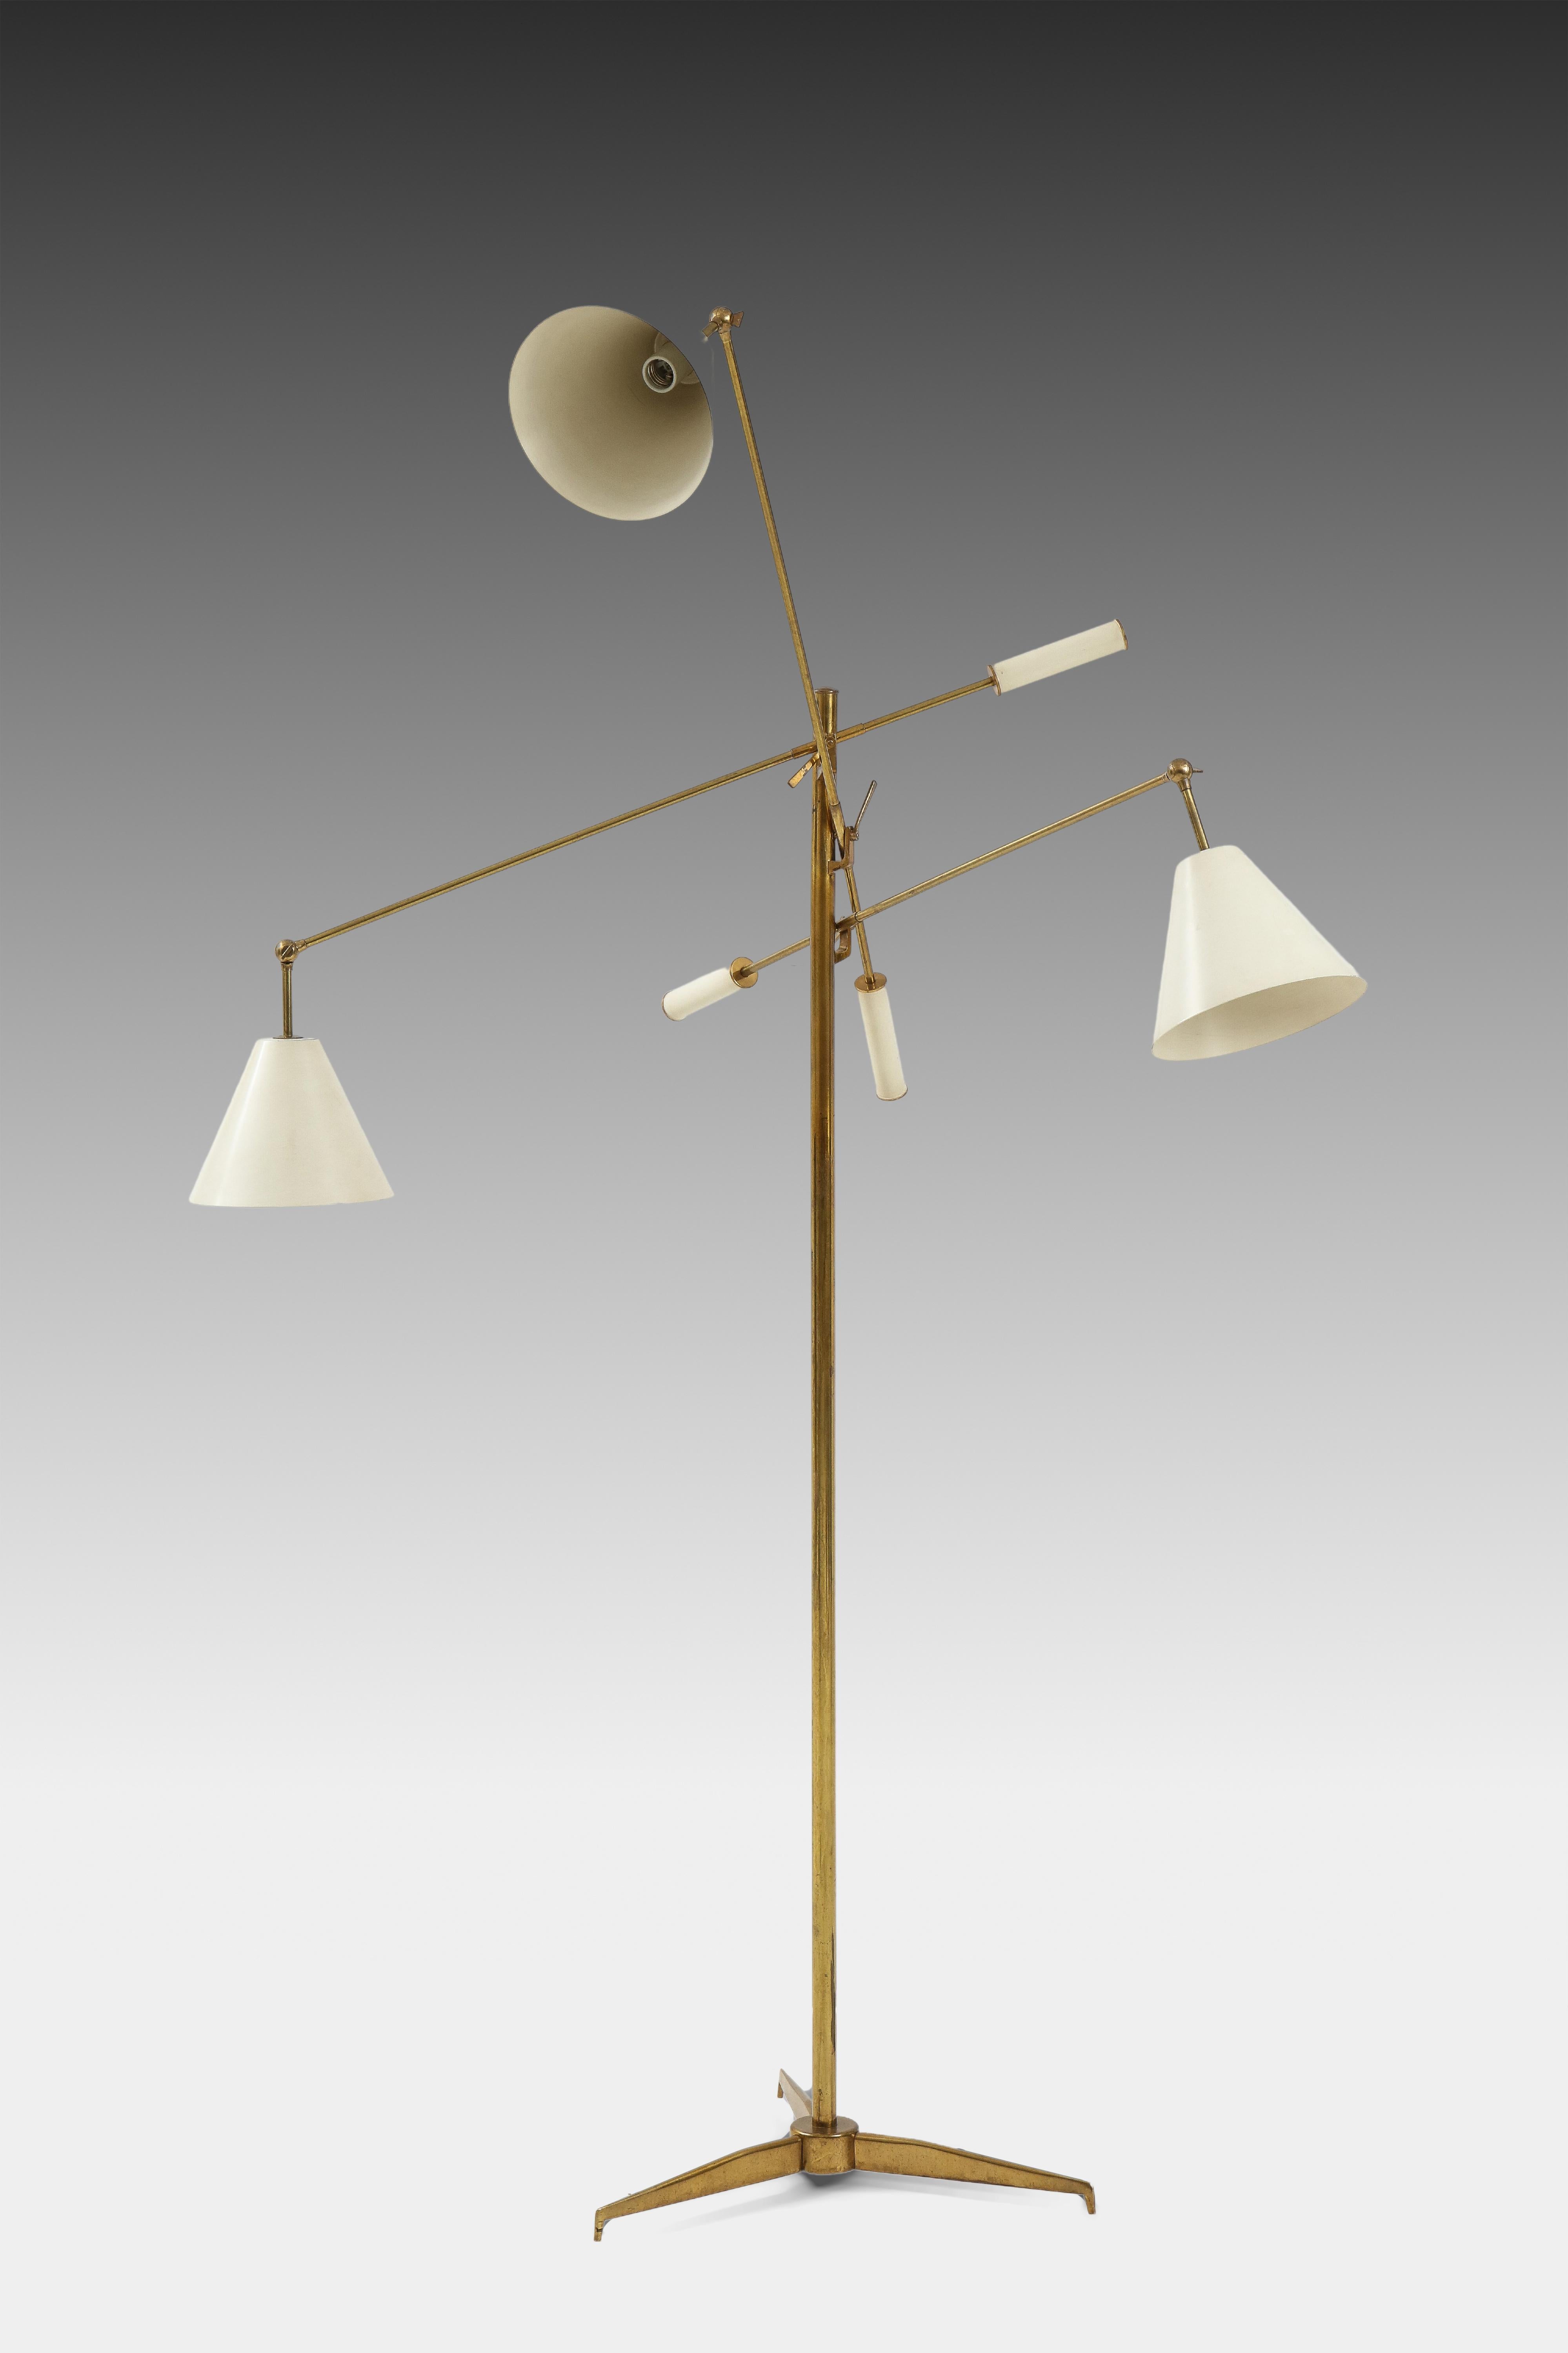 Designed by Angelo Lelii for Arredoluce iconic and original rare first edition Triennale model 2128 three-arm adjustable counter-balance floor lamp, Italy, circa 1951. Each original off-white painted shade is attached to pivoting arm which